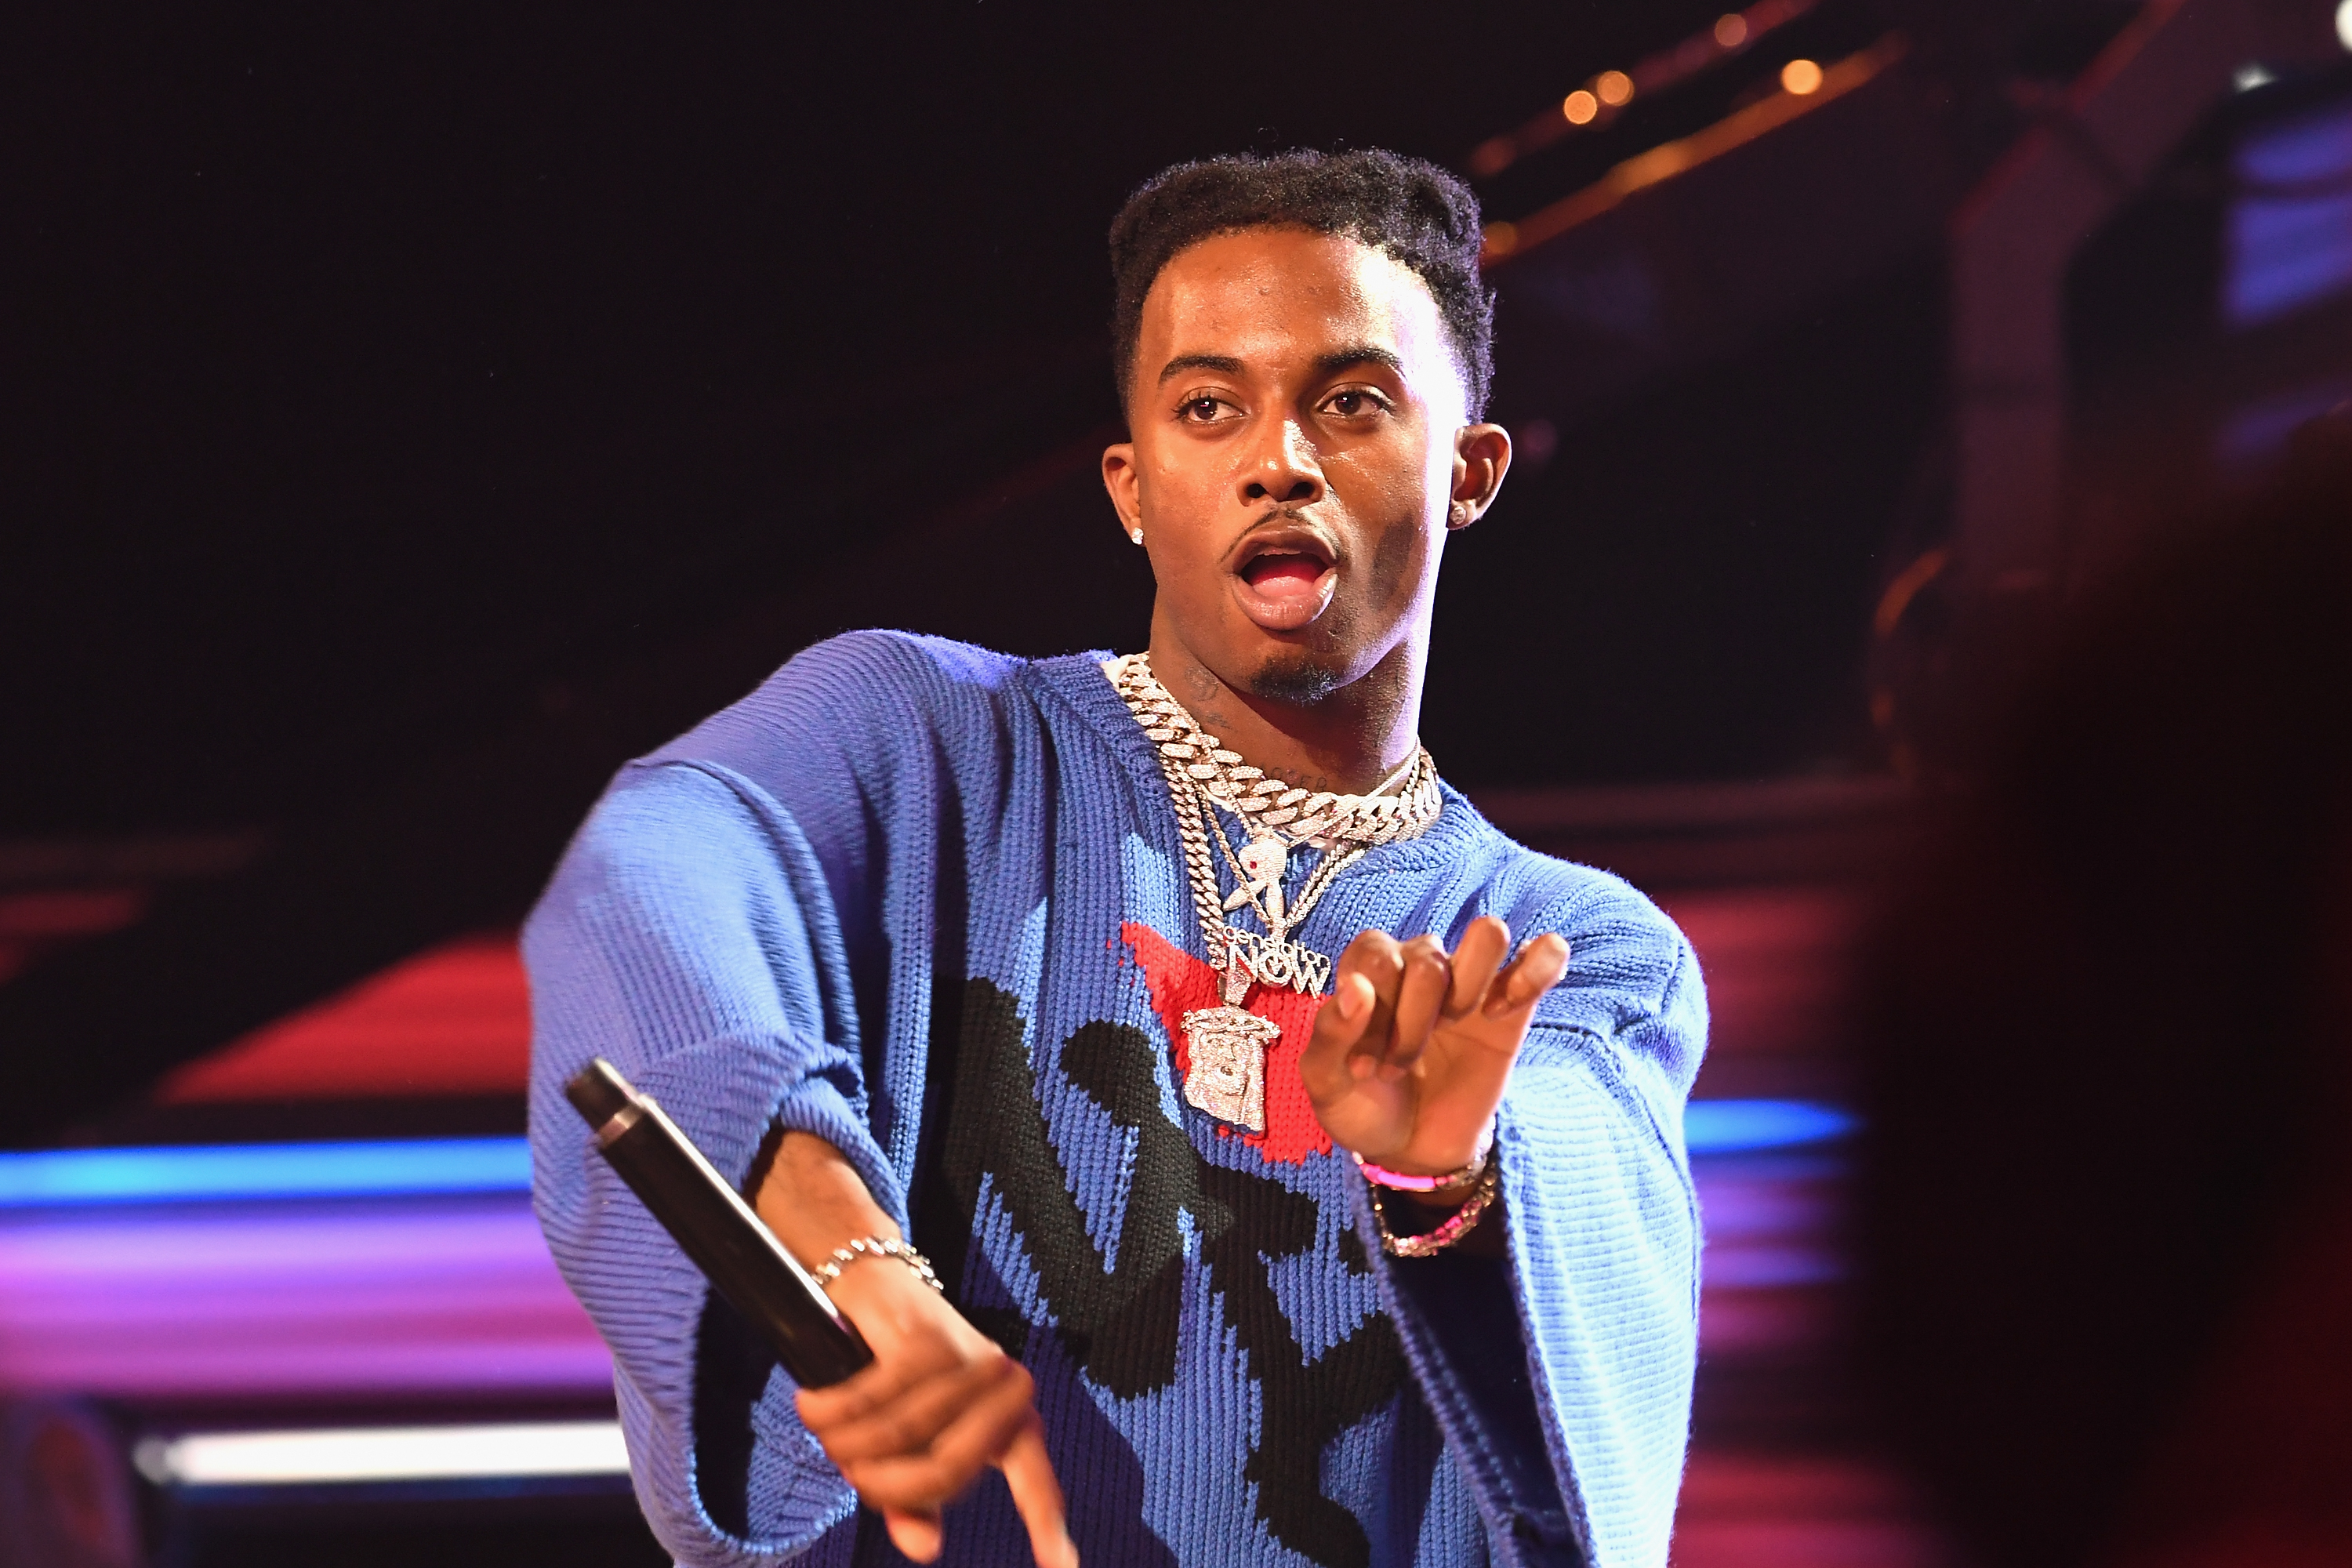 Playboi Carti’s “Die Lit” Leaves The Masses Unmoved: First Impressions